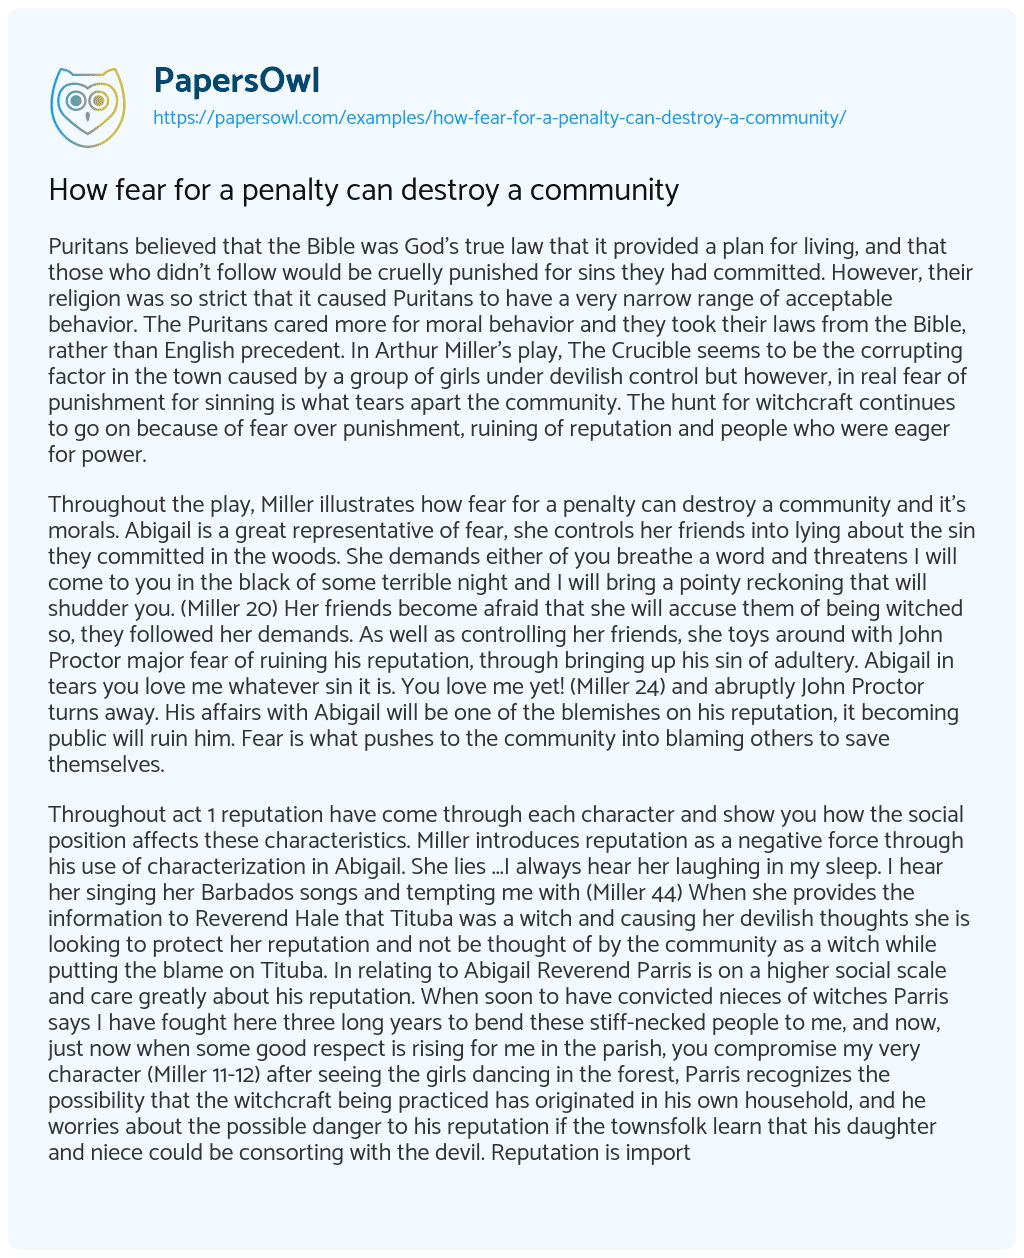 Essay on How Fear for a Penalty Can Destroy a Community